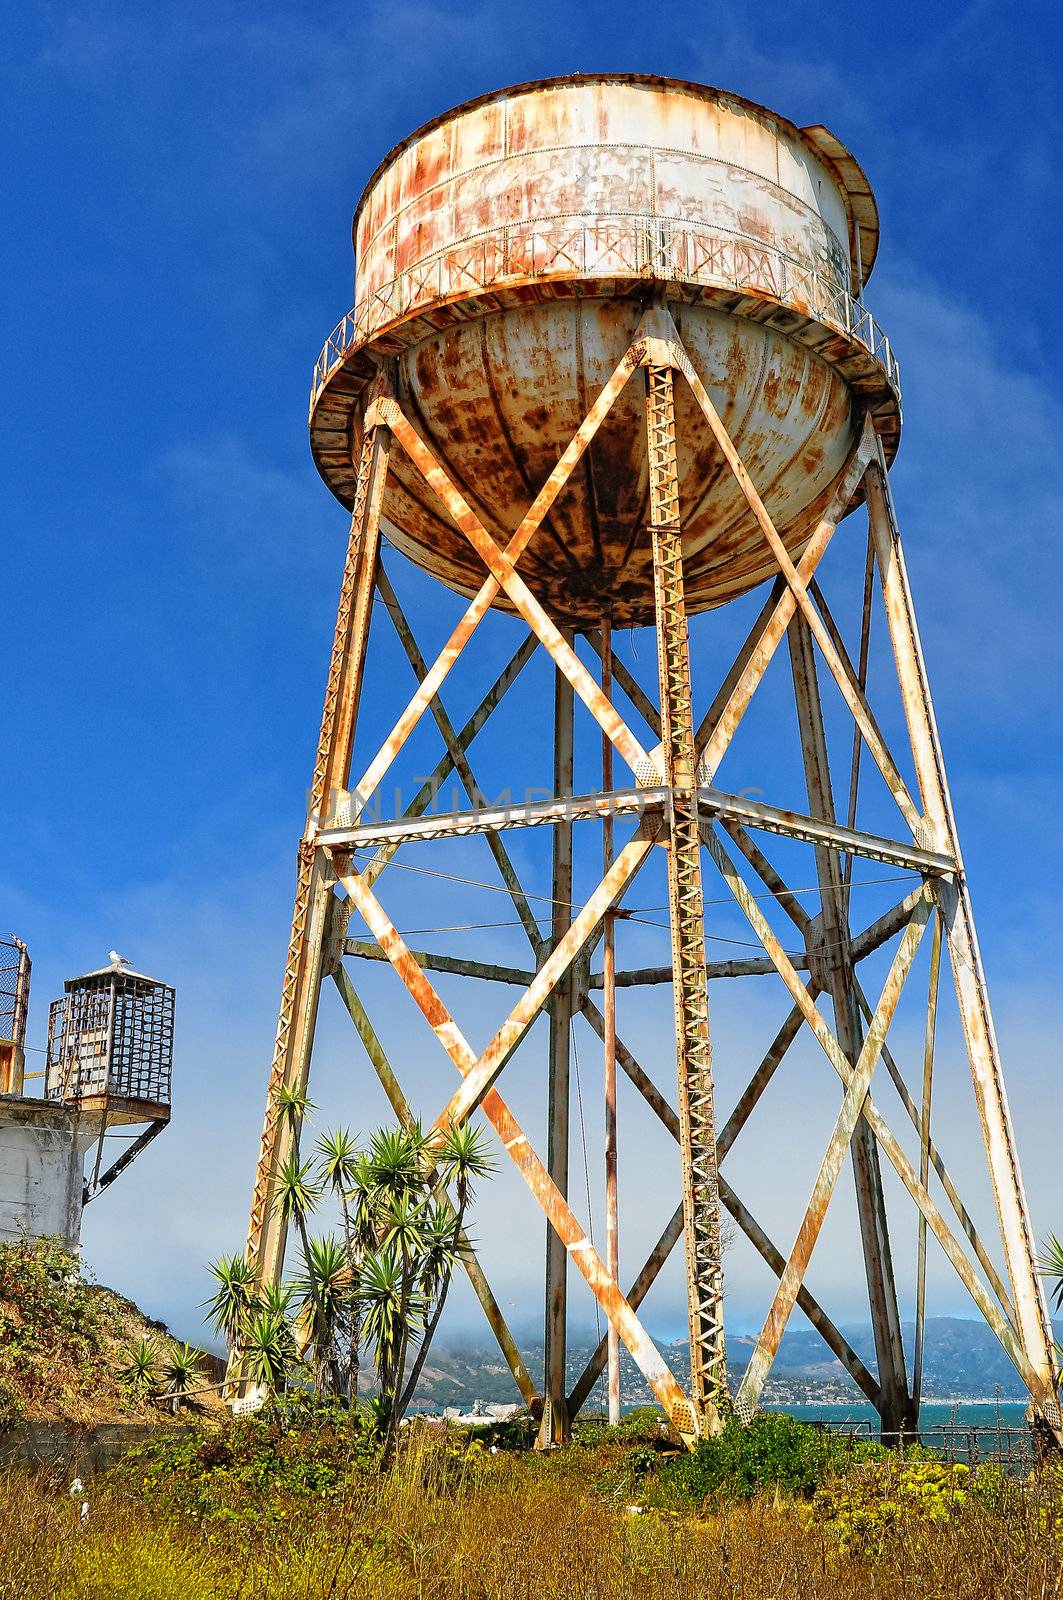 Rusty old water tank tower by martinm303